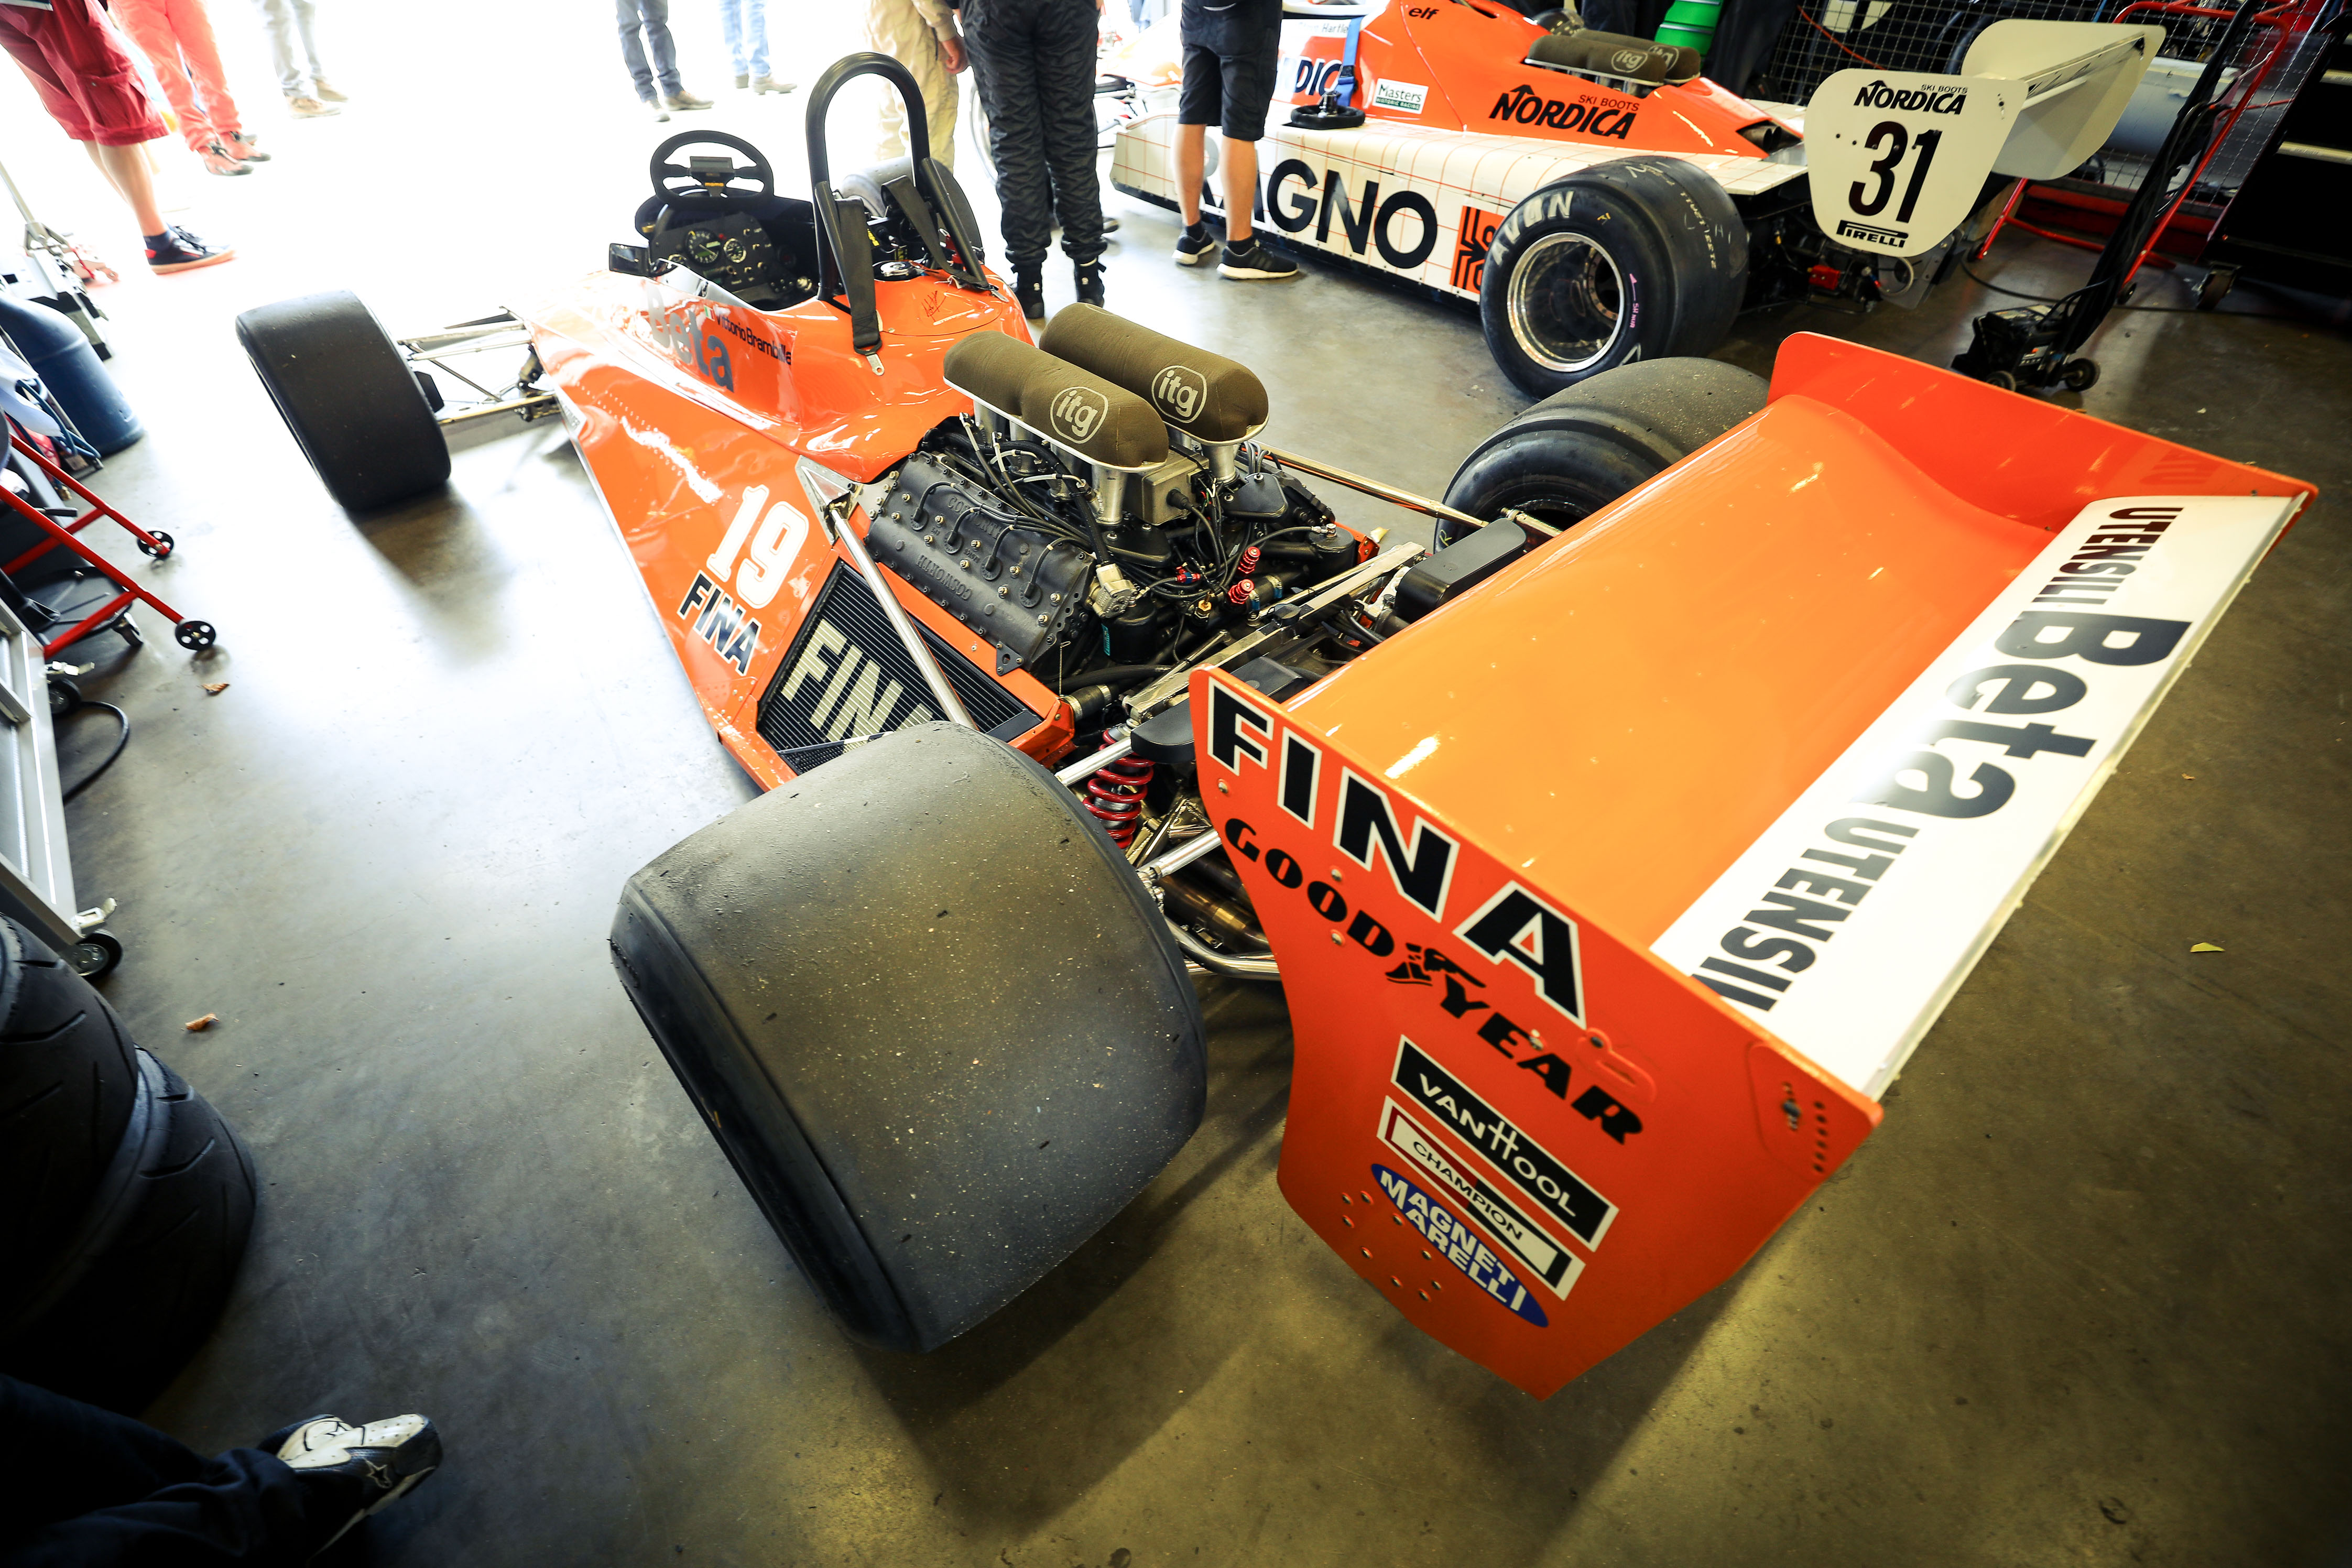 FIA Masters Historic Formula One field had two race of the Oldtimer Grand Prix 